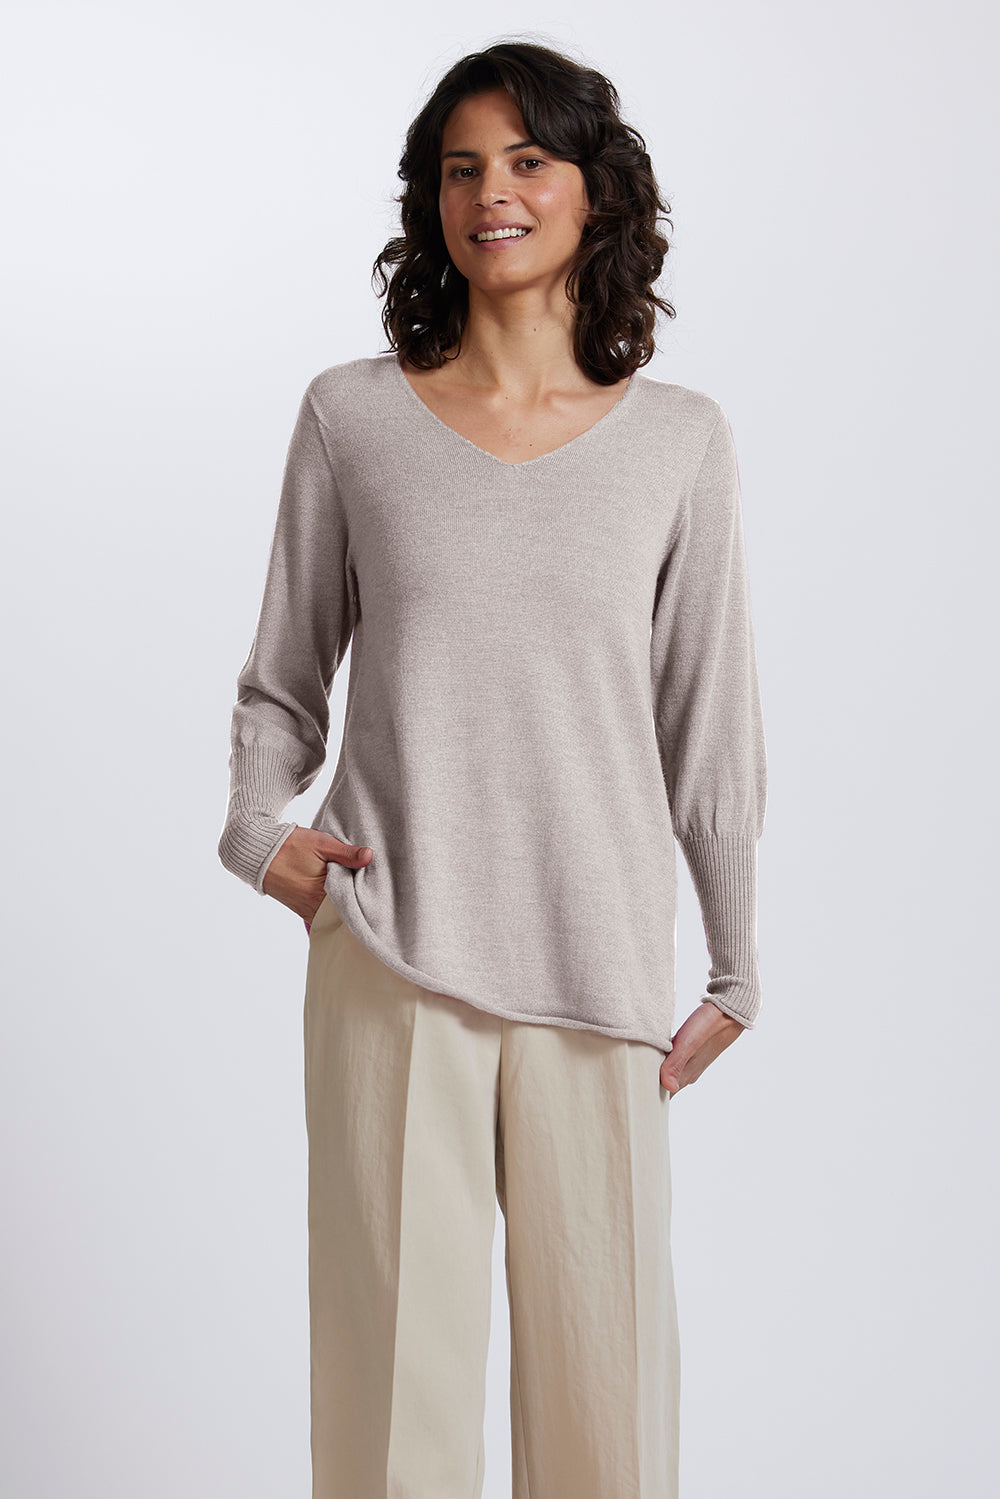 A-Line V Neck Sweater in Light Sand by Royal Merino